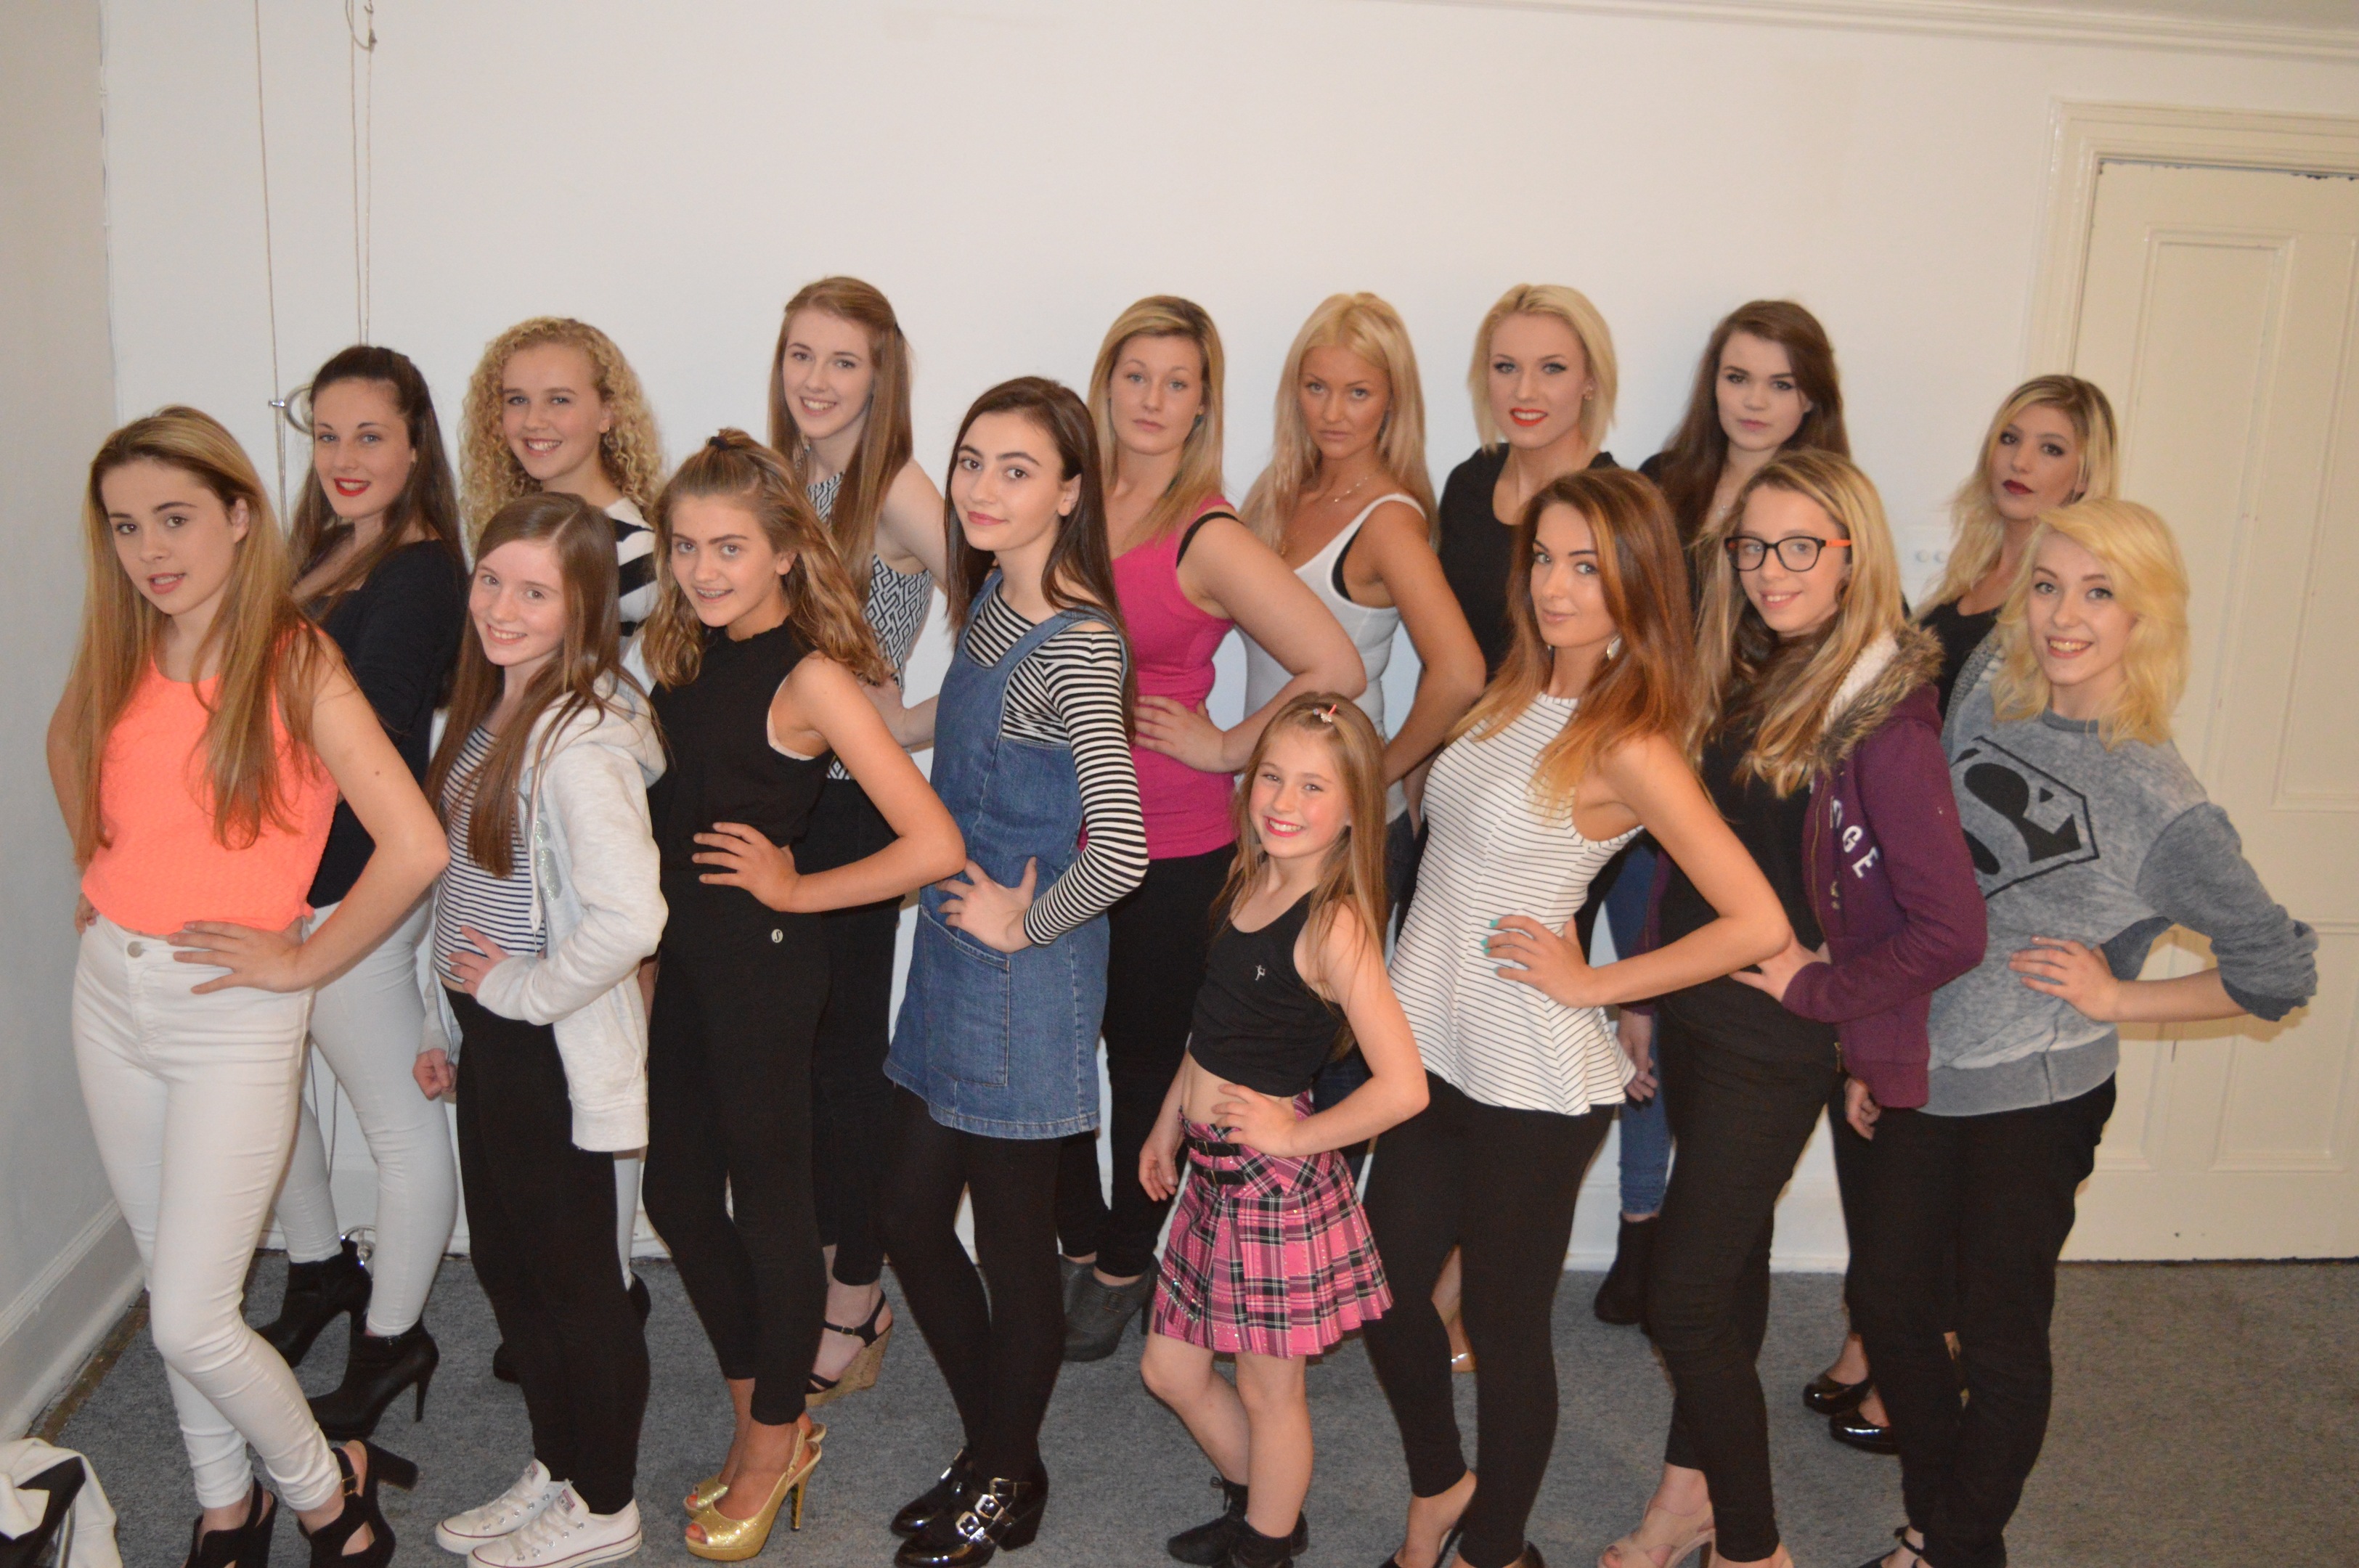 Some of the prospective models at Highland Fashion Week